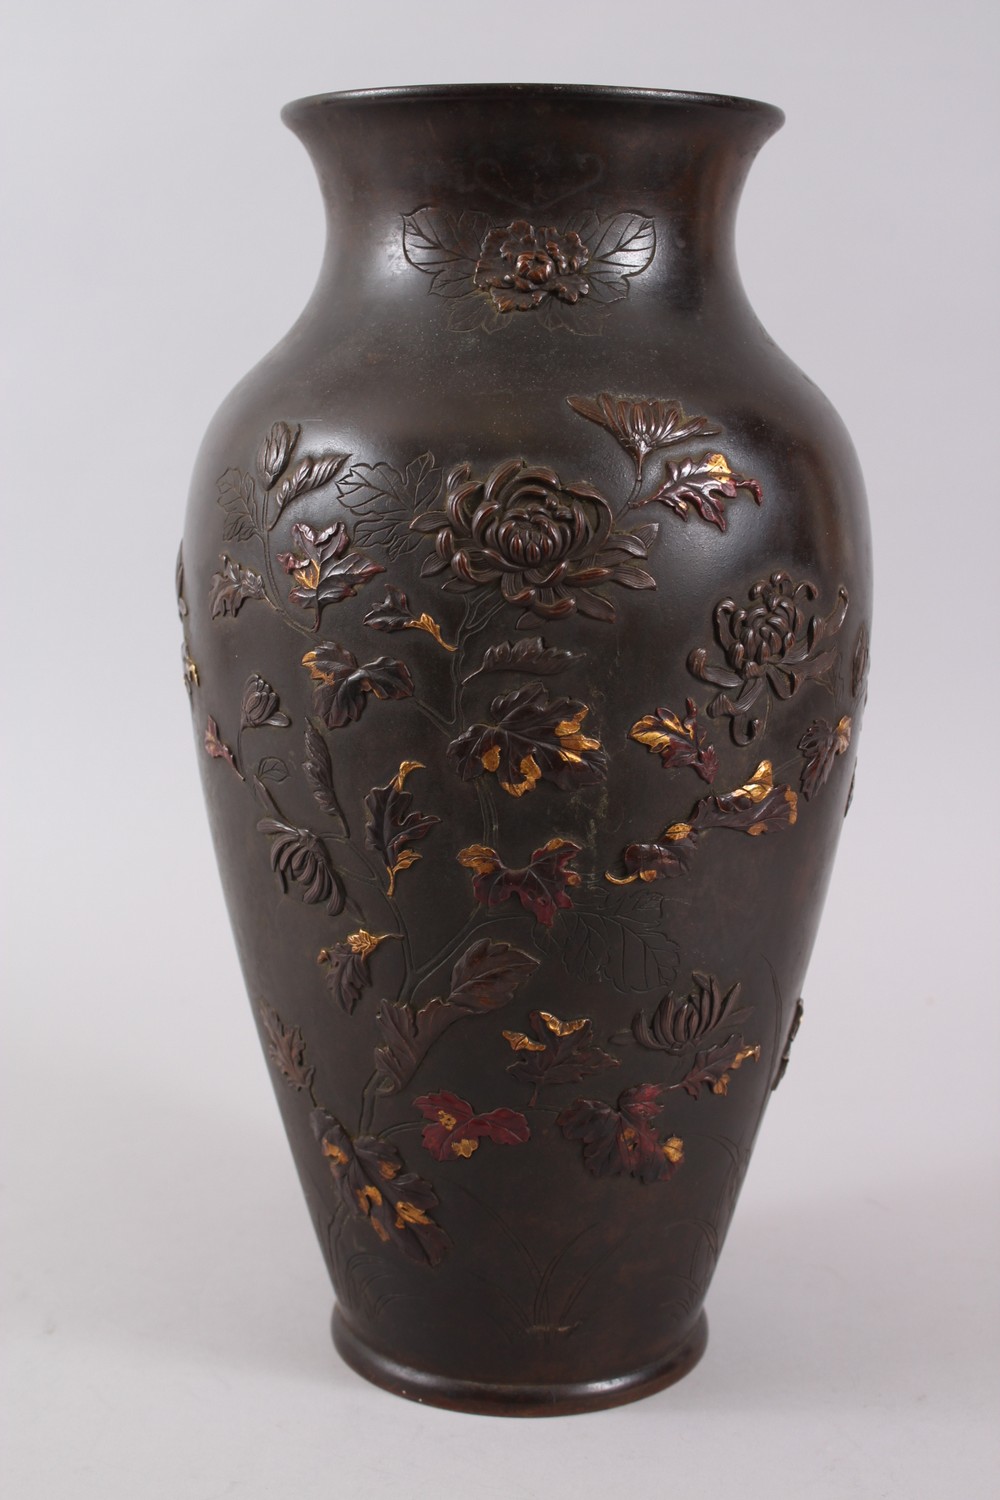 A GOOD JAPANESE MEIJI PERIOD BRONZE & MIXED METAL ONLAID VASE, depicting scenes of a peacock stood - Image 3 of 8